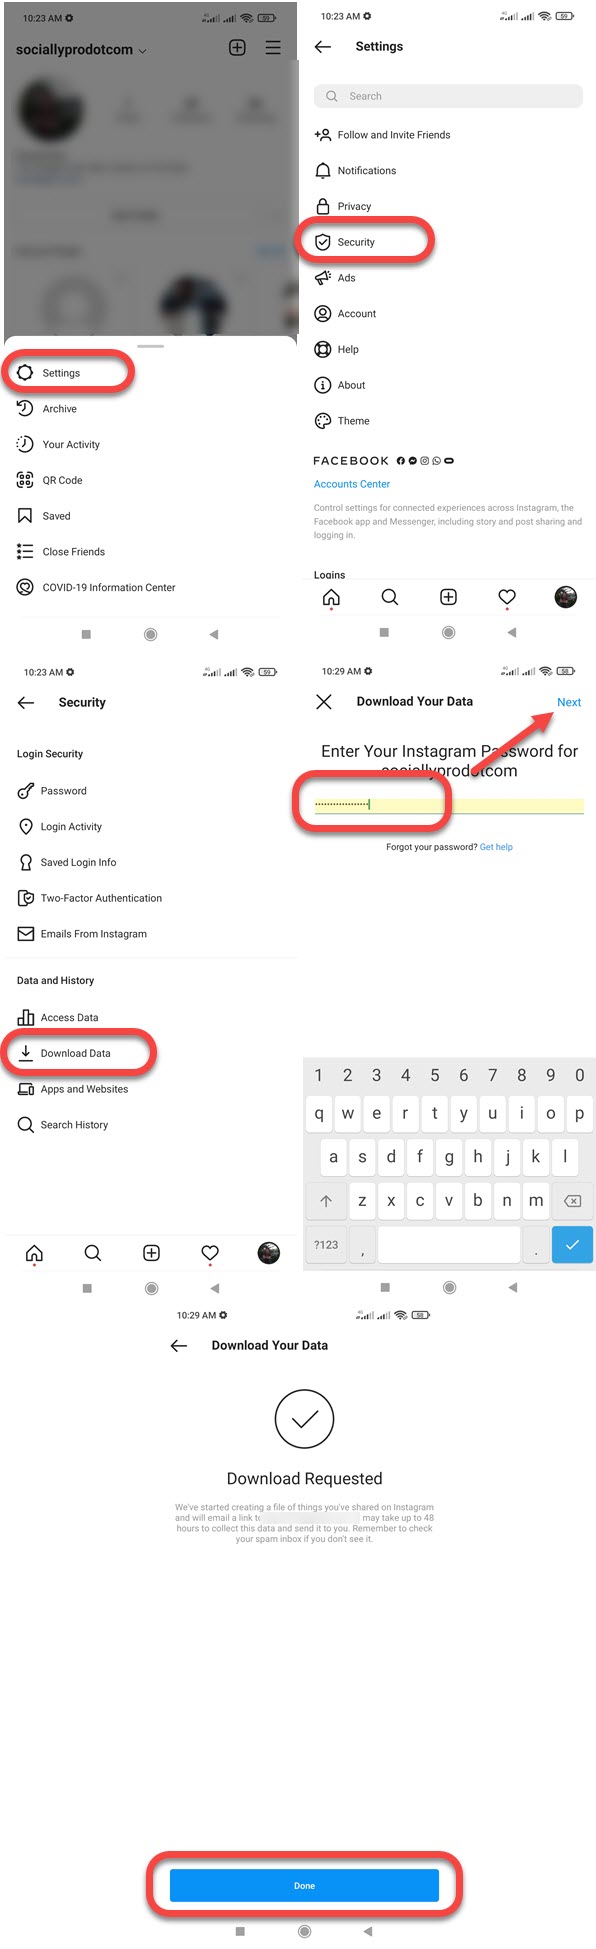 Download Instagram Account Data to Recover Deleted Messages